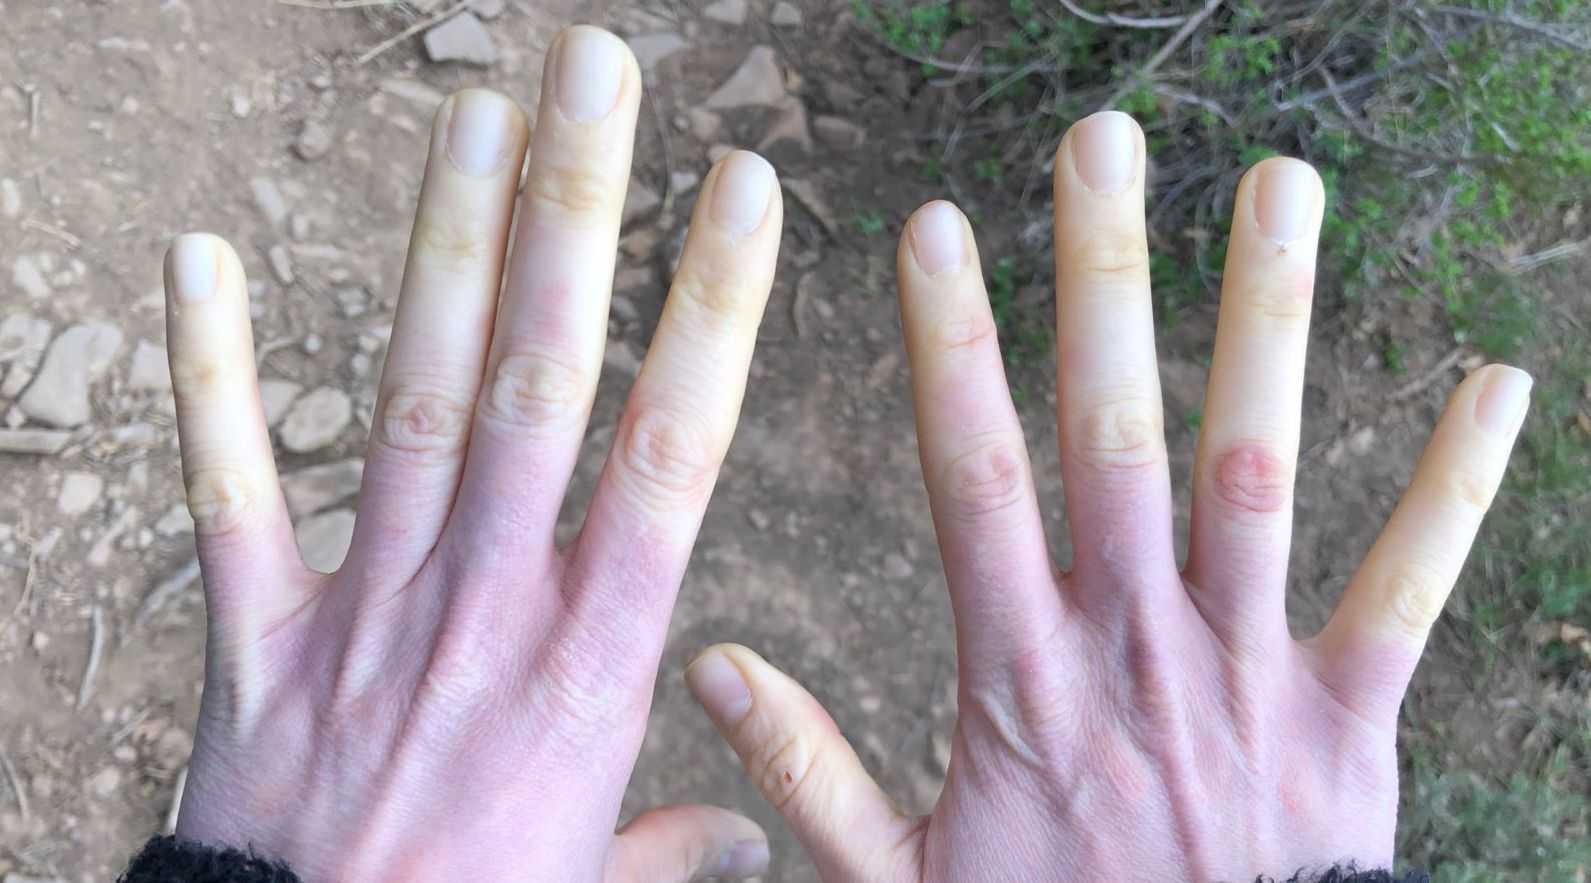 Hands with white fingers during a Raynaud's Syndrome episode